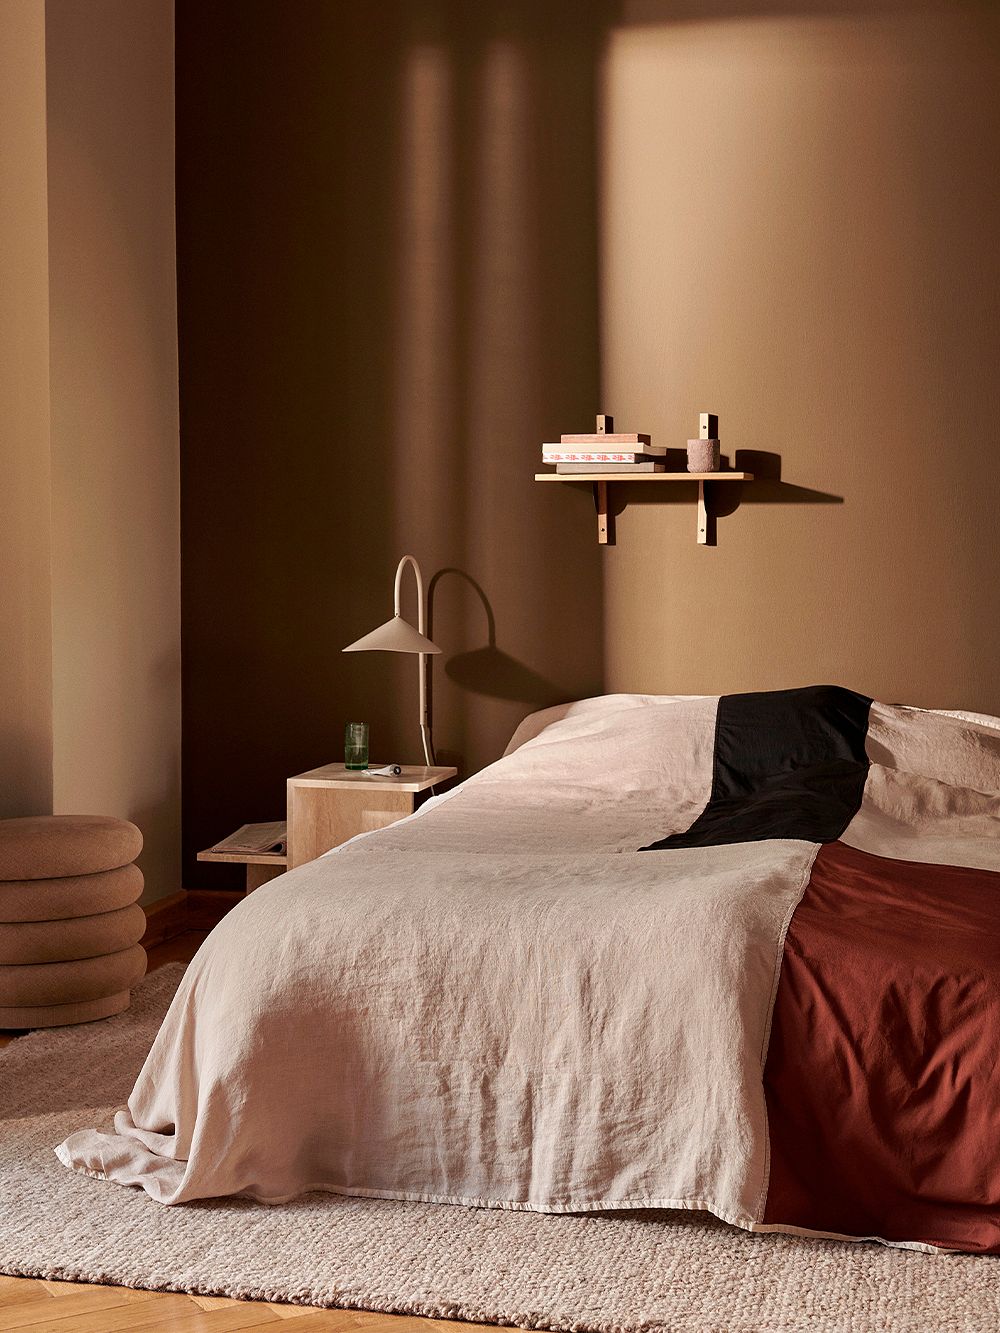 An image with ferm LIVING's Part bedspread on top of the bed, as part of the bedroom decor.